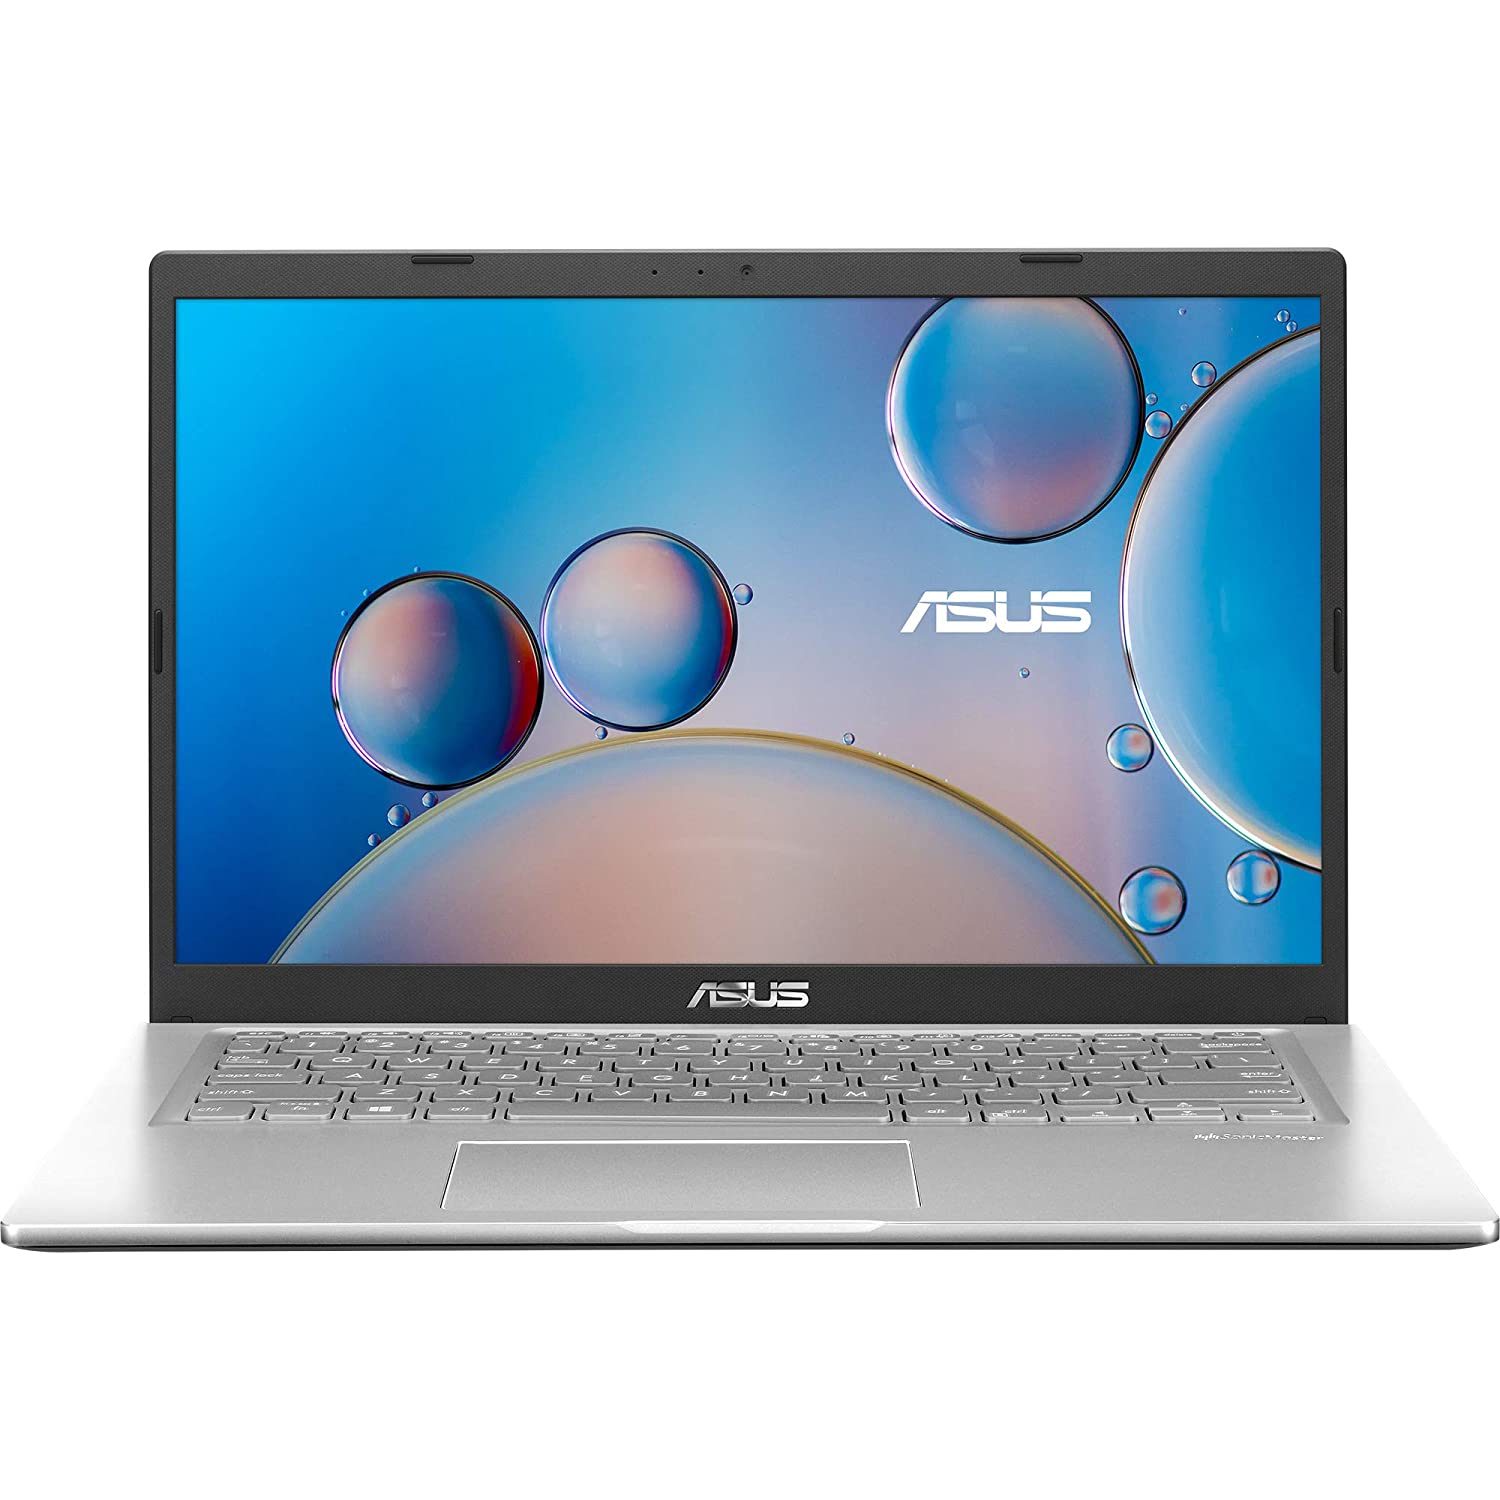 Amazon Festival Sale: Bumper Discount on ASUS VivoBook 14Inch Laptop on Amazon, more than 30 thousand direct discount on MRP of laptop